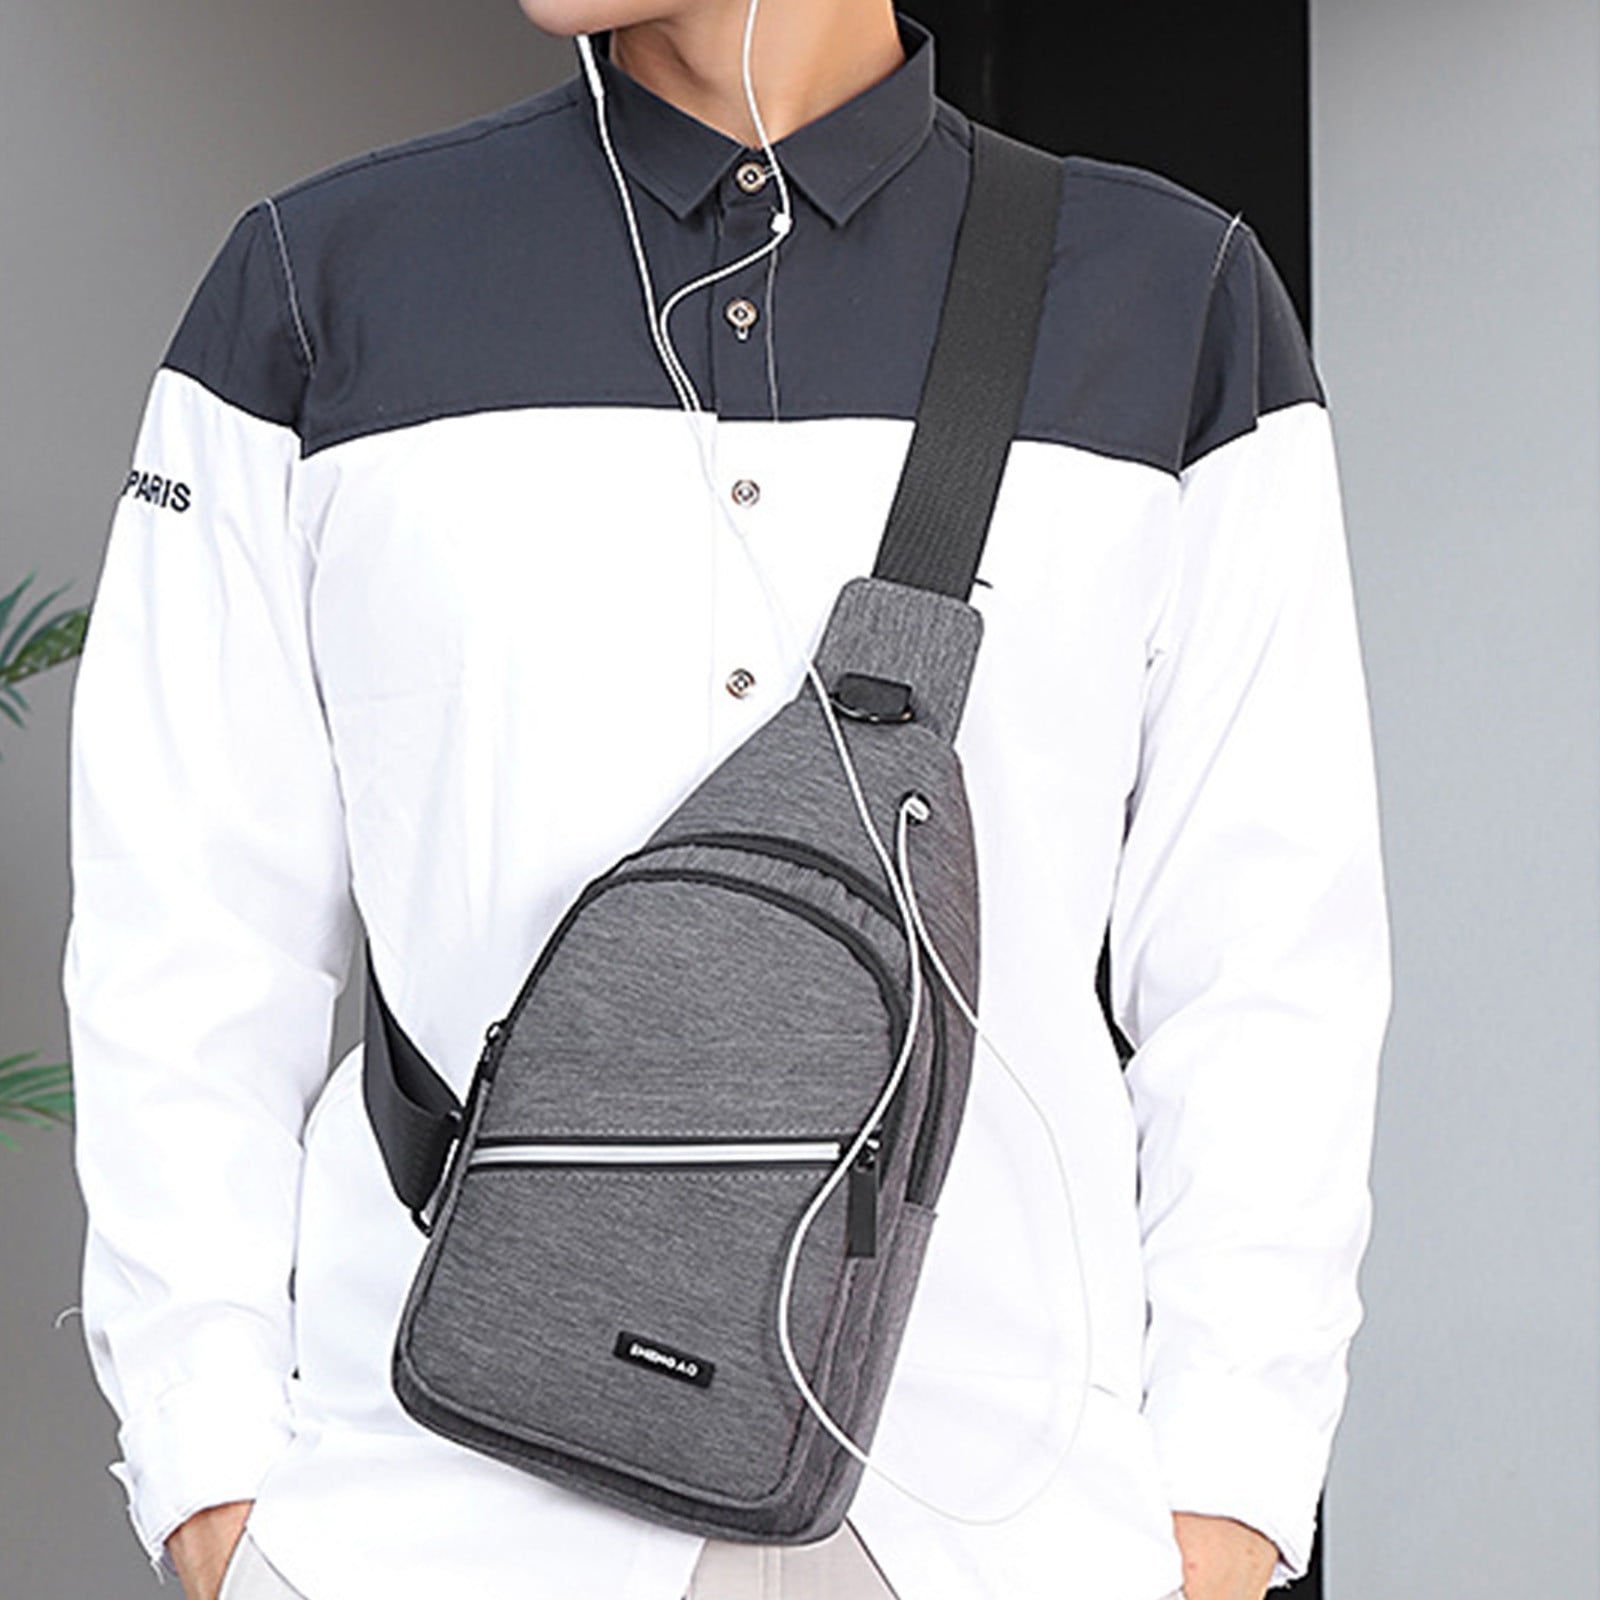 EJWQWQE Small Sling Bag Crossbody Chest Shoulder Water Resistant Sling  Purse One Strap Travel Bag For Men Women Boys With Earphone Hole